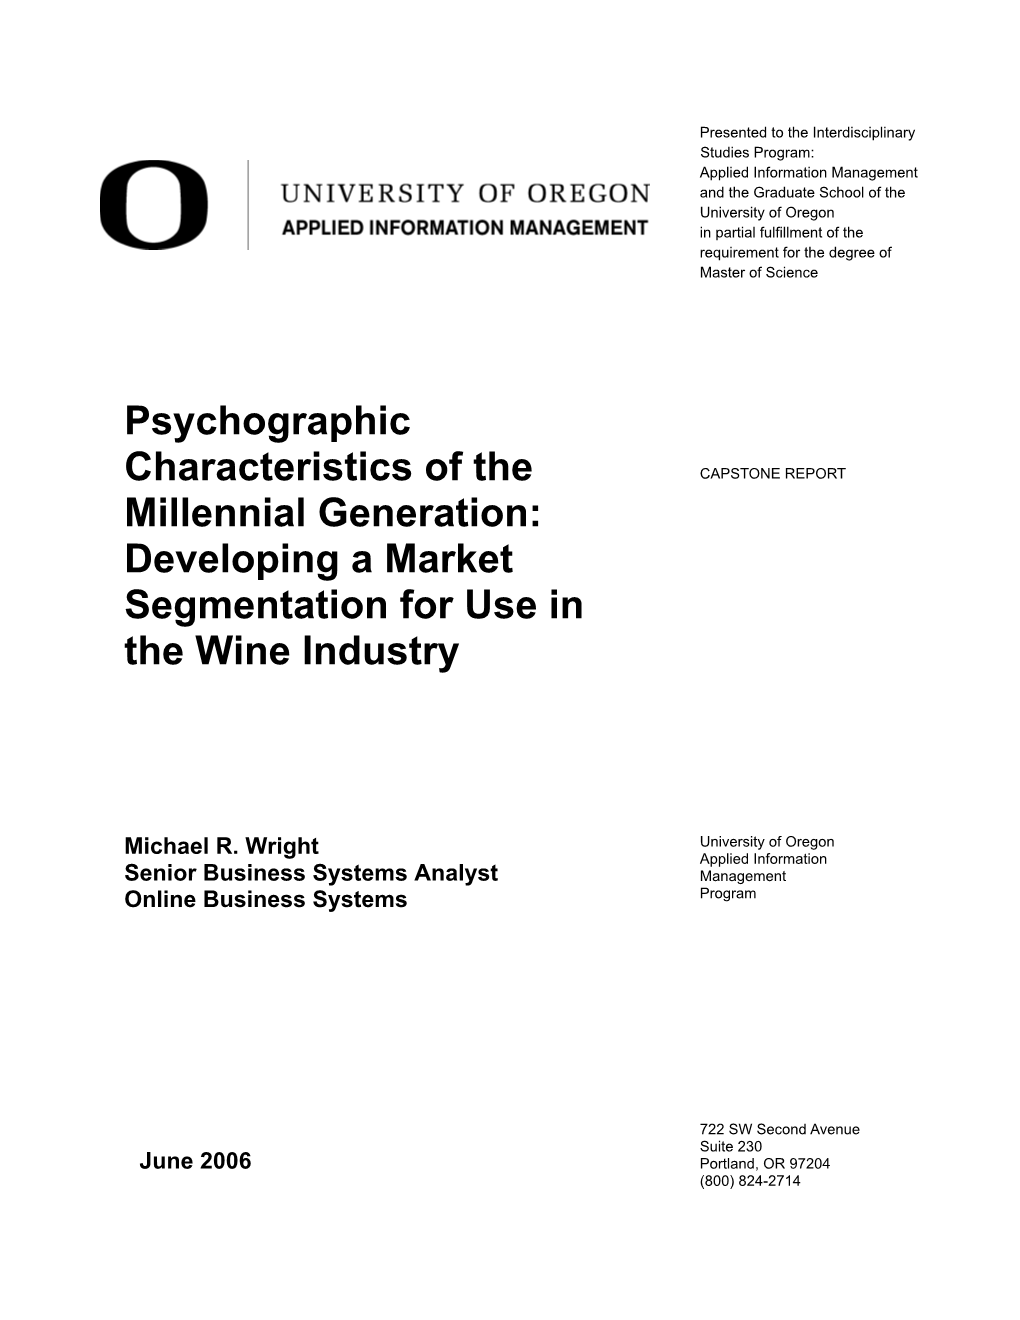 Psychographic Characteristics of the Millennial Generation: Developing a Market Segmentation for Use in the Wine Industry